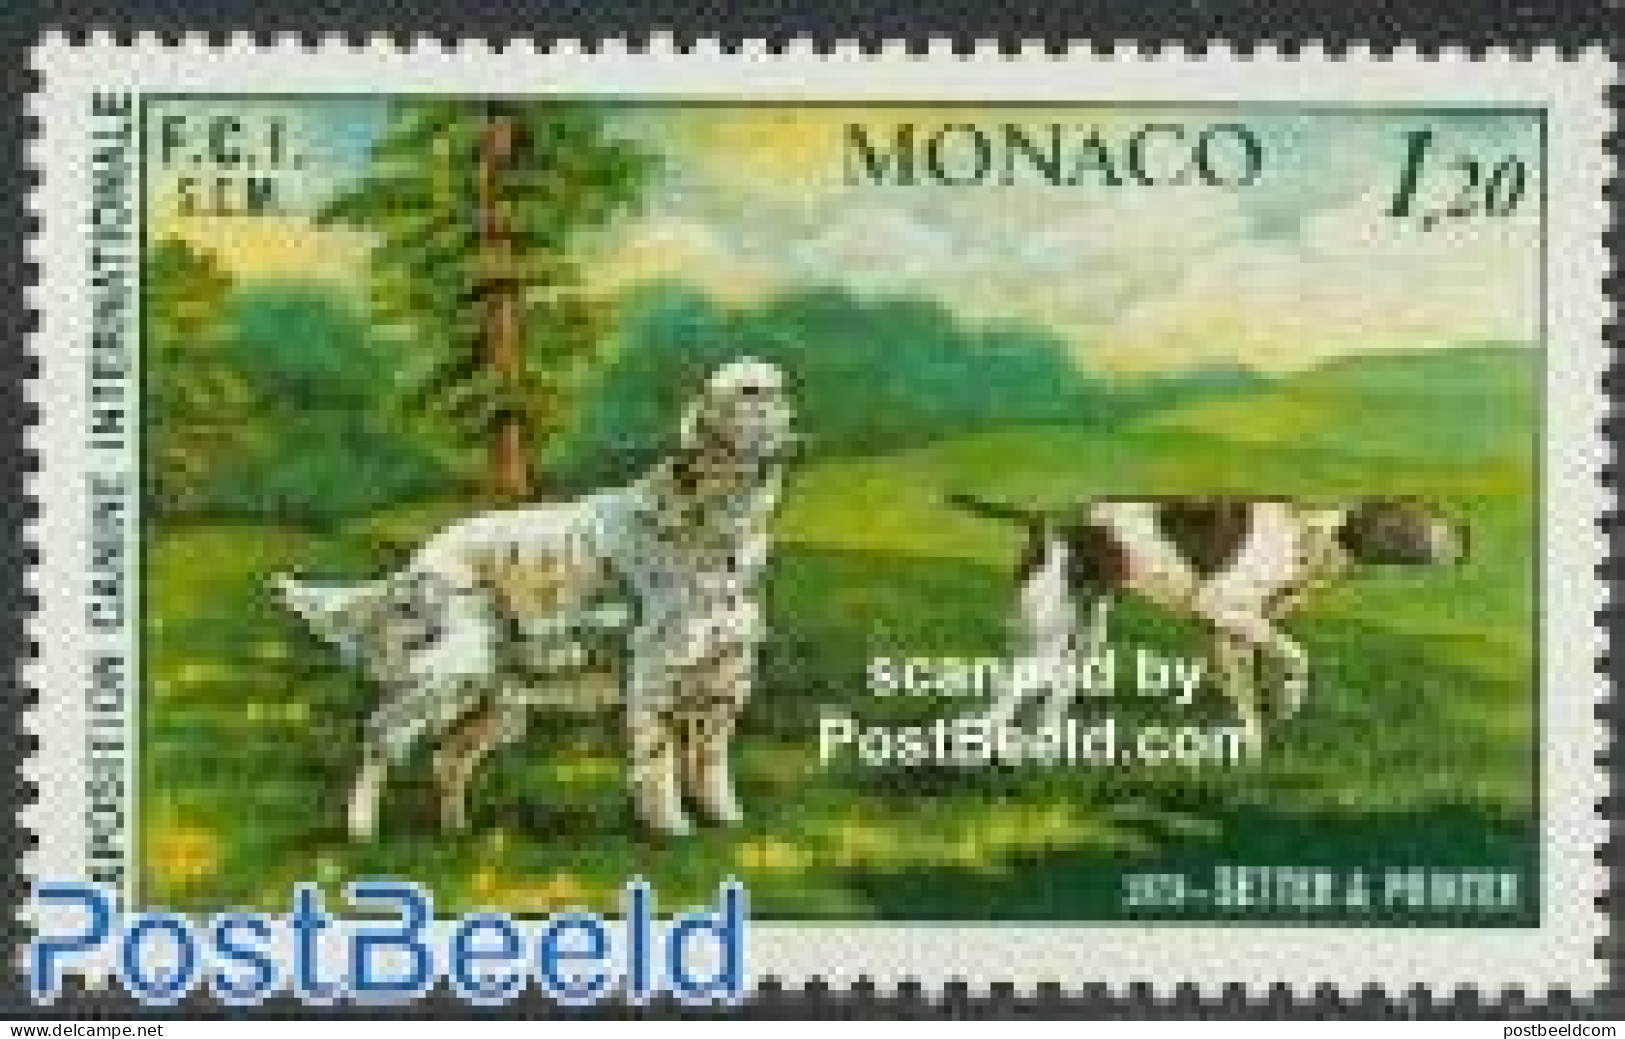 Monaco 1979 Dog Exposition 1v, Mint NH, Nature - Dogs - Nuevos